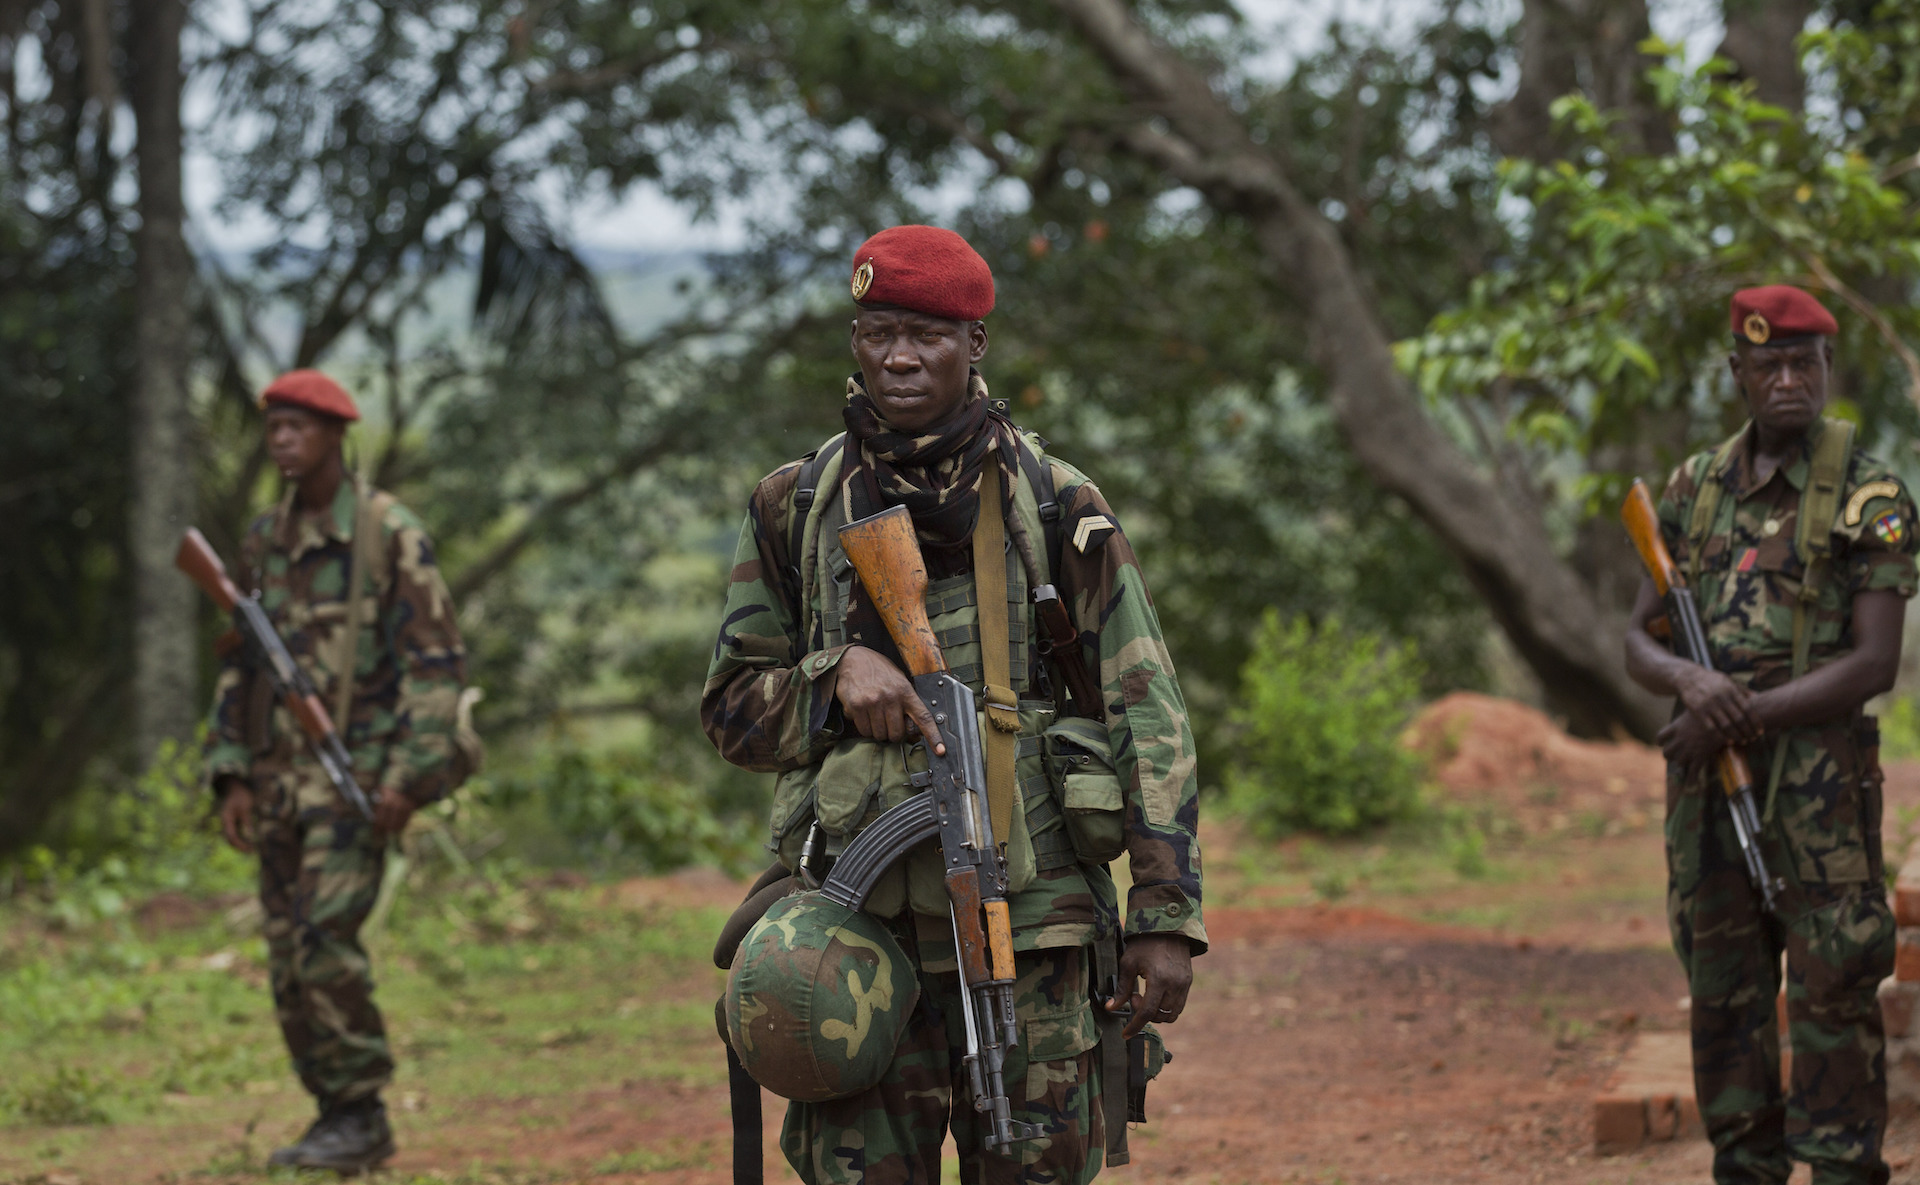 DRC: REVIEWING THE EVIDENCE FOR AN ISLAMIC STATE CALIPHATE PROVINCE IN THE CONGO